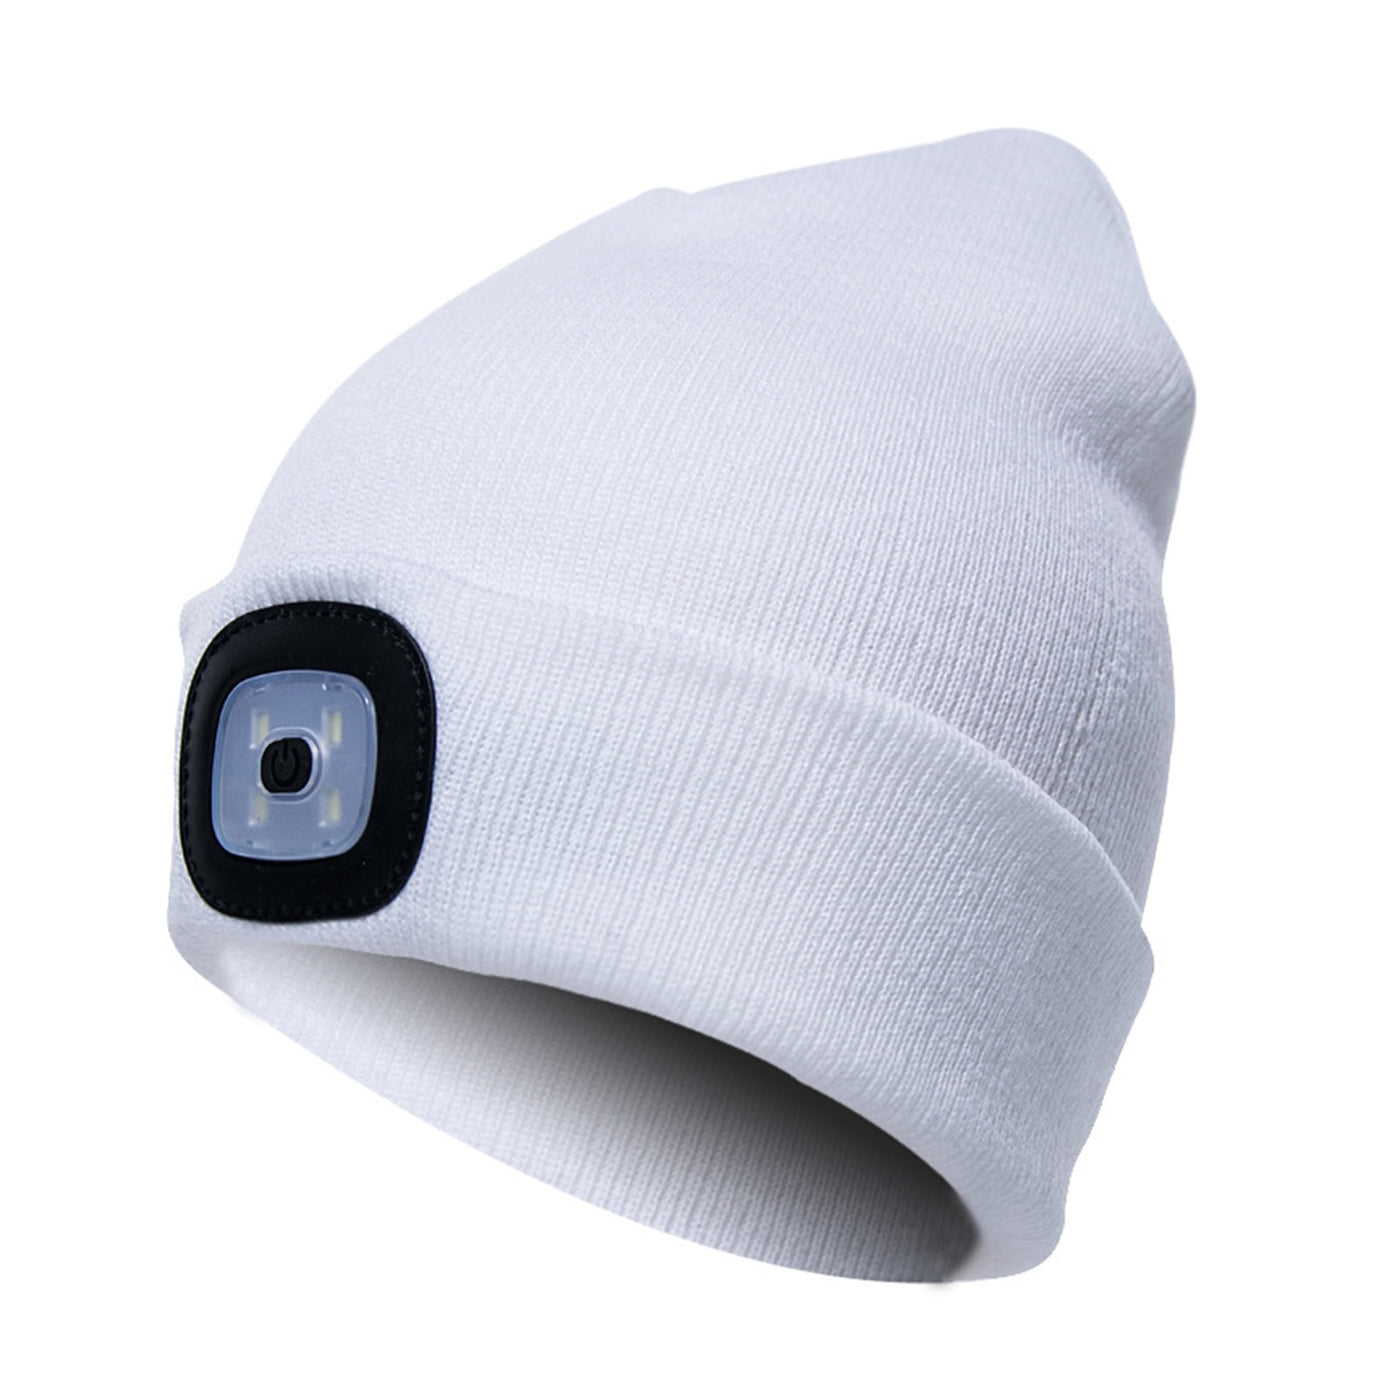 Unisex Winter LED Light Luminous Warm Knitted Hat Outdoor Camping Head Lamp Cap